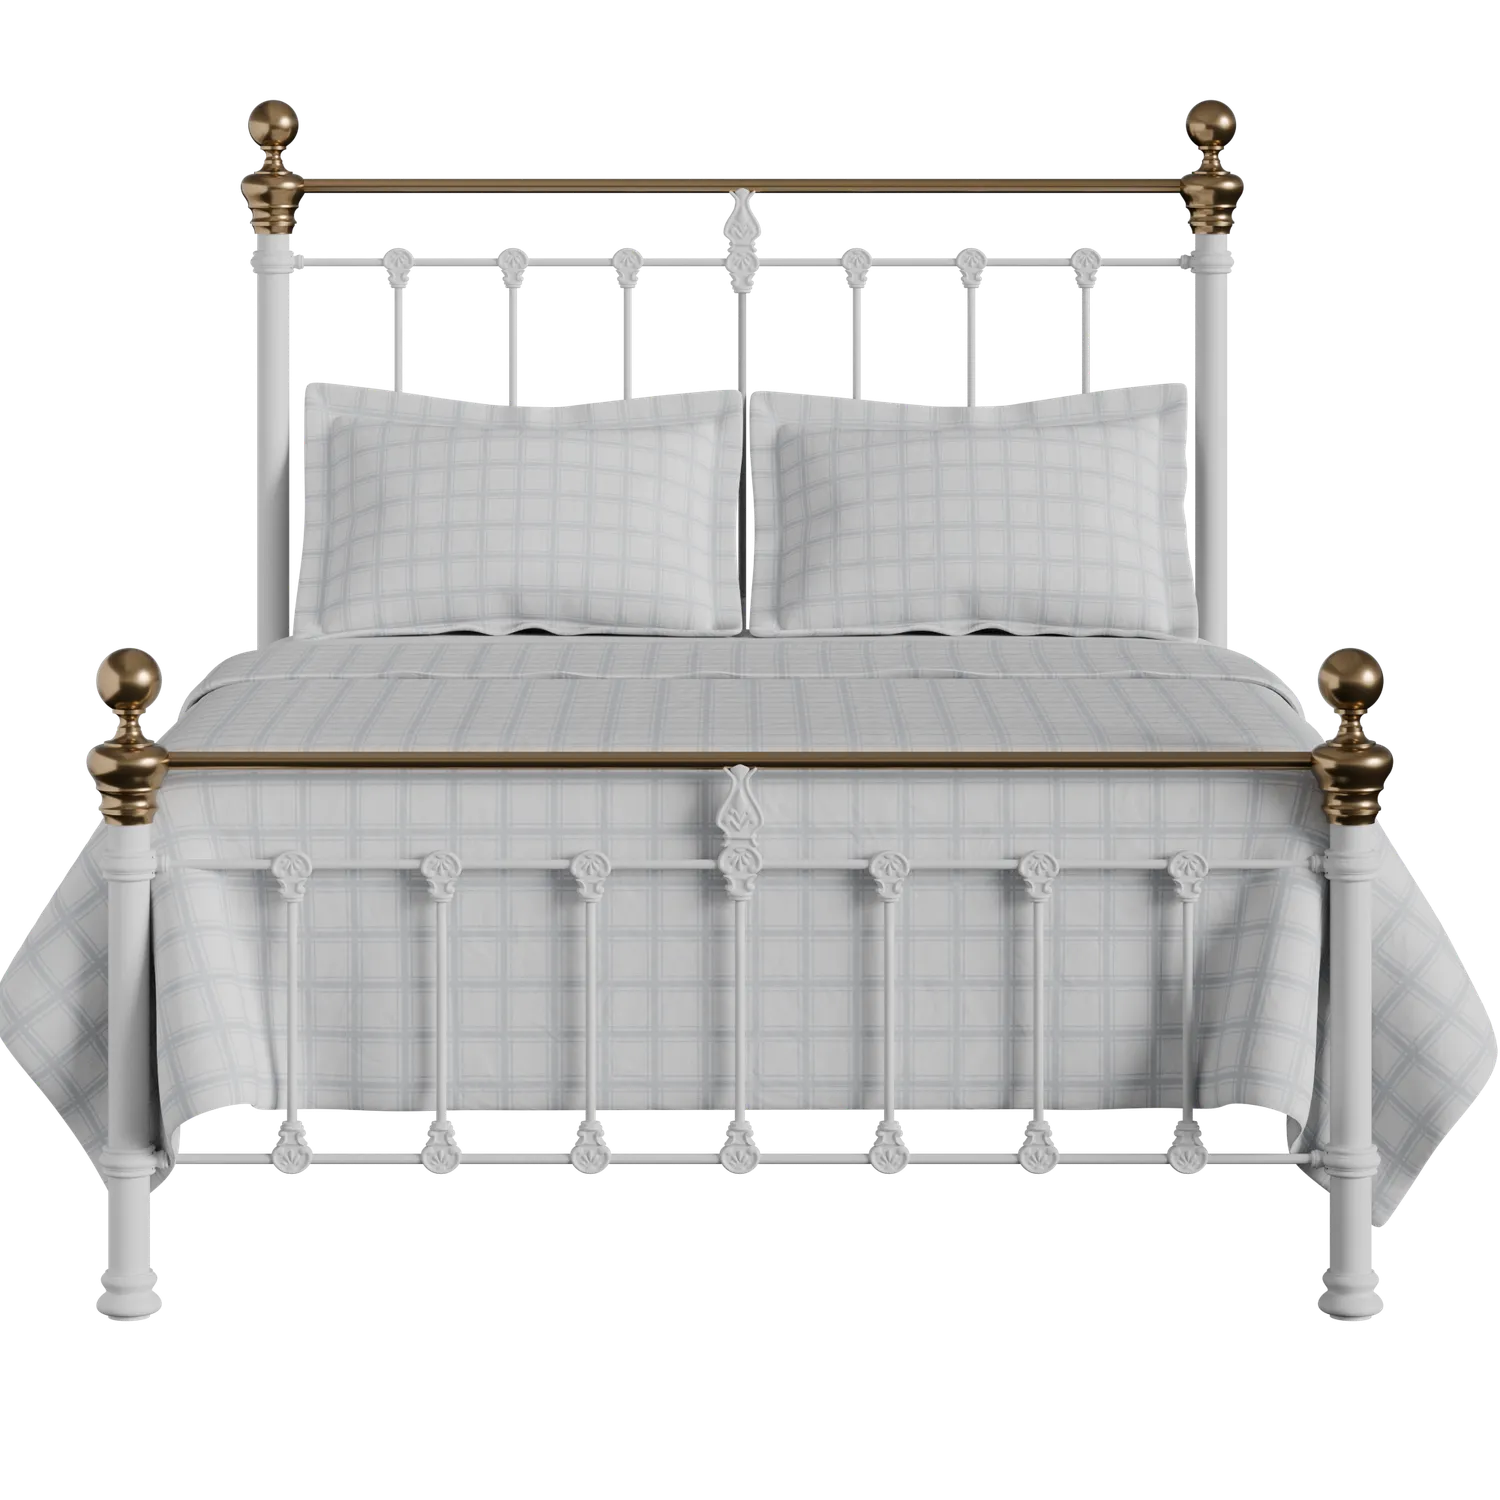 Hamilton Low Footend iron/metal bed in white